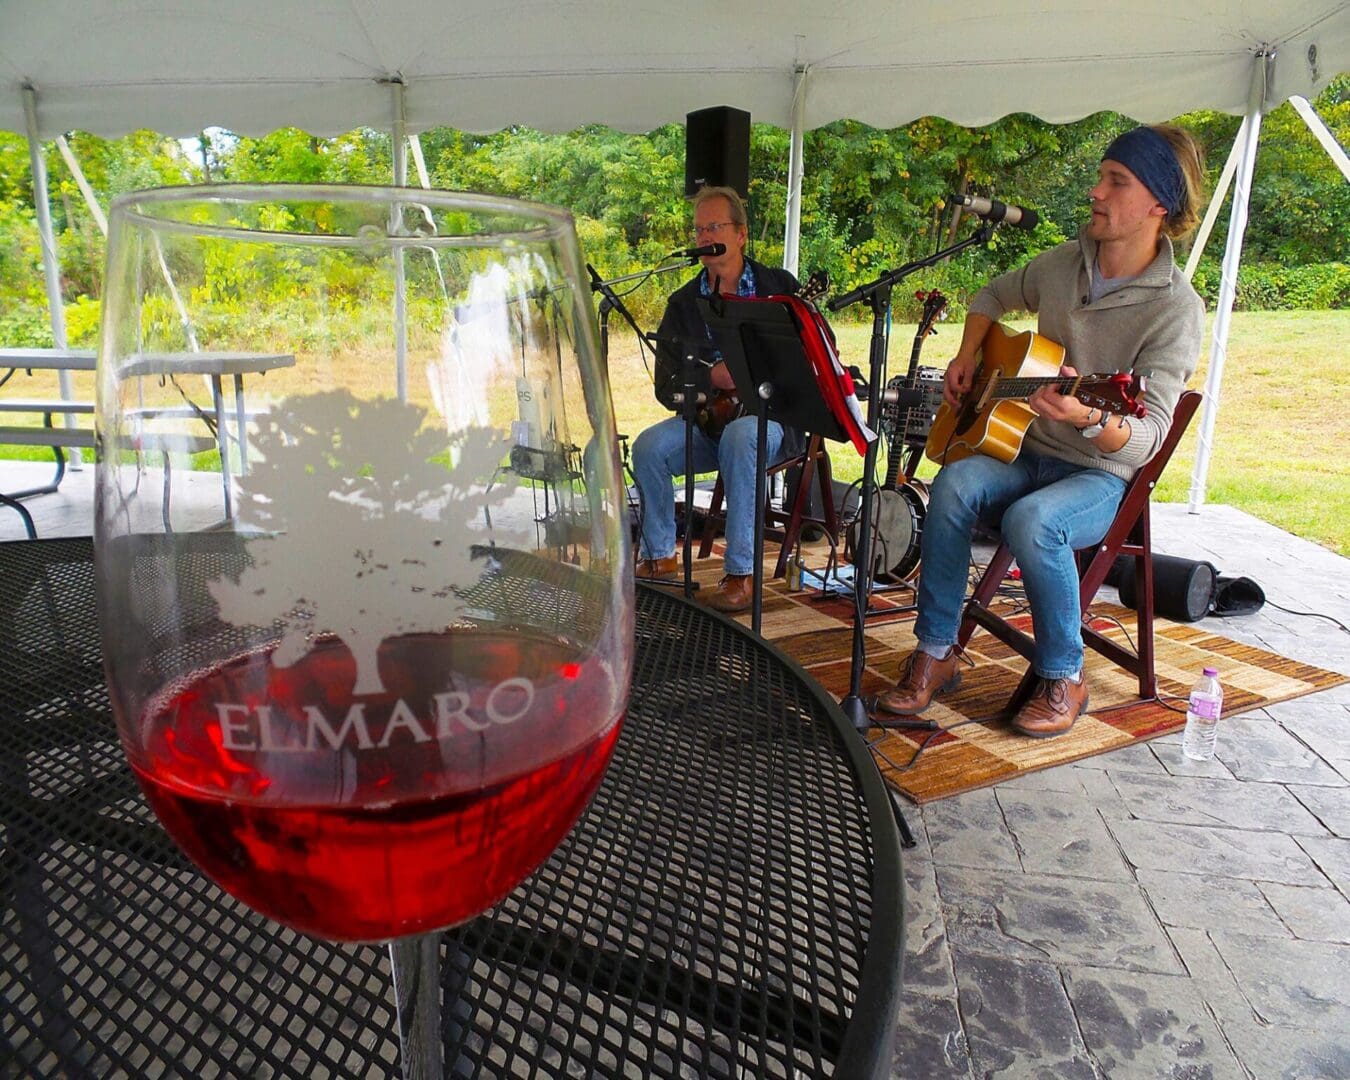 A glass of wine on a table next to a guitar.